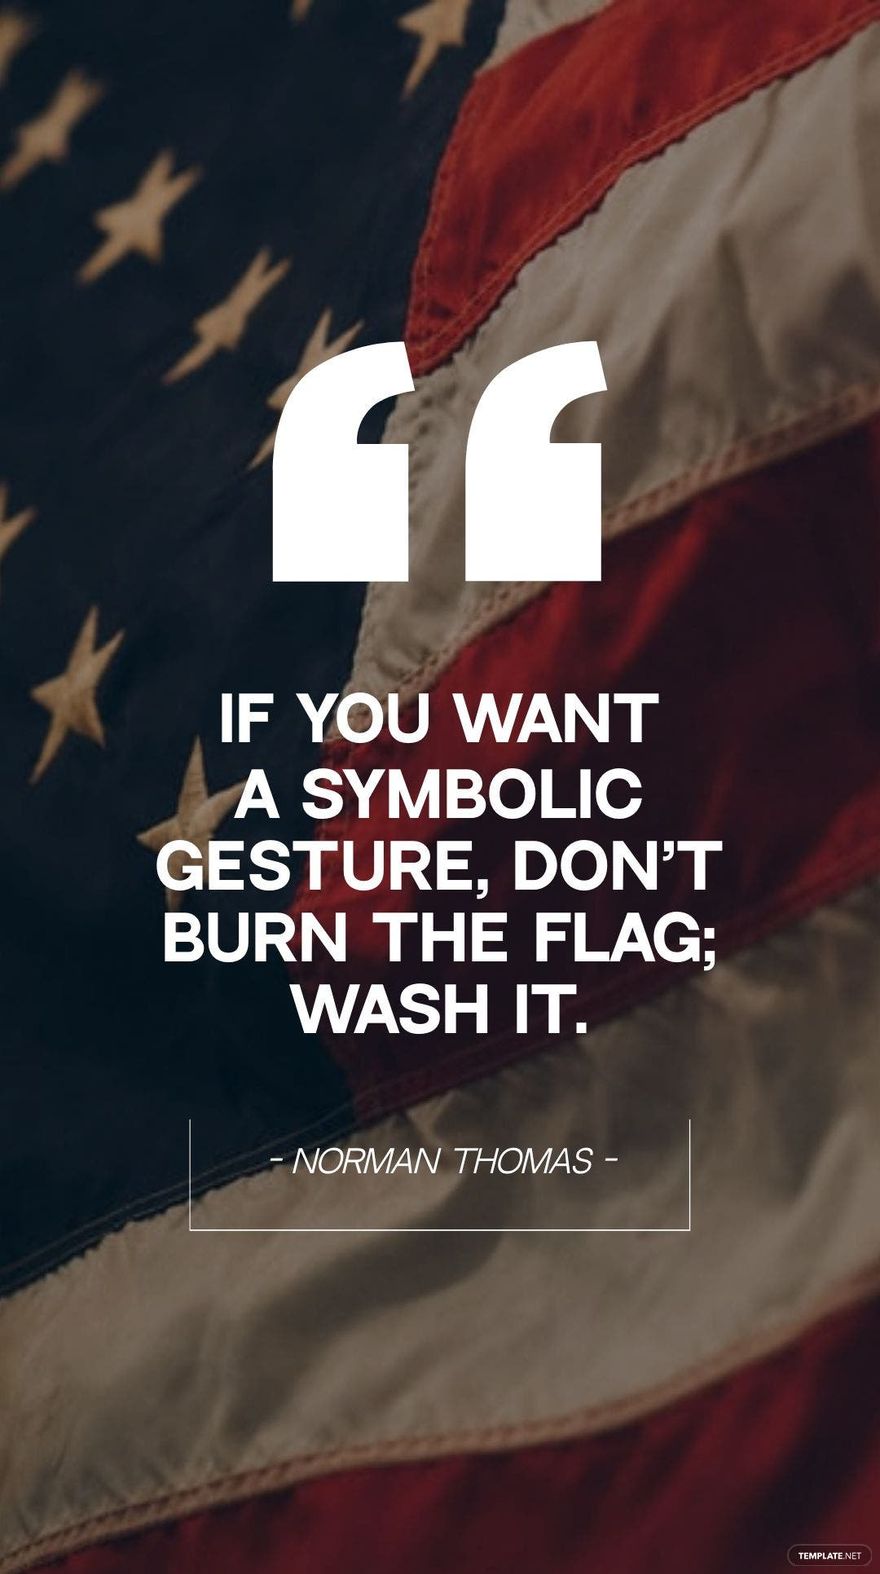 Norman Thomas - If you want a symbolic gesture, don’t burn the flag; wash it. in JPG